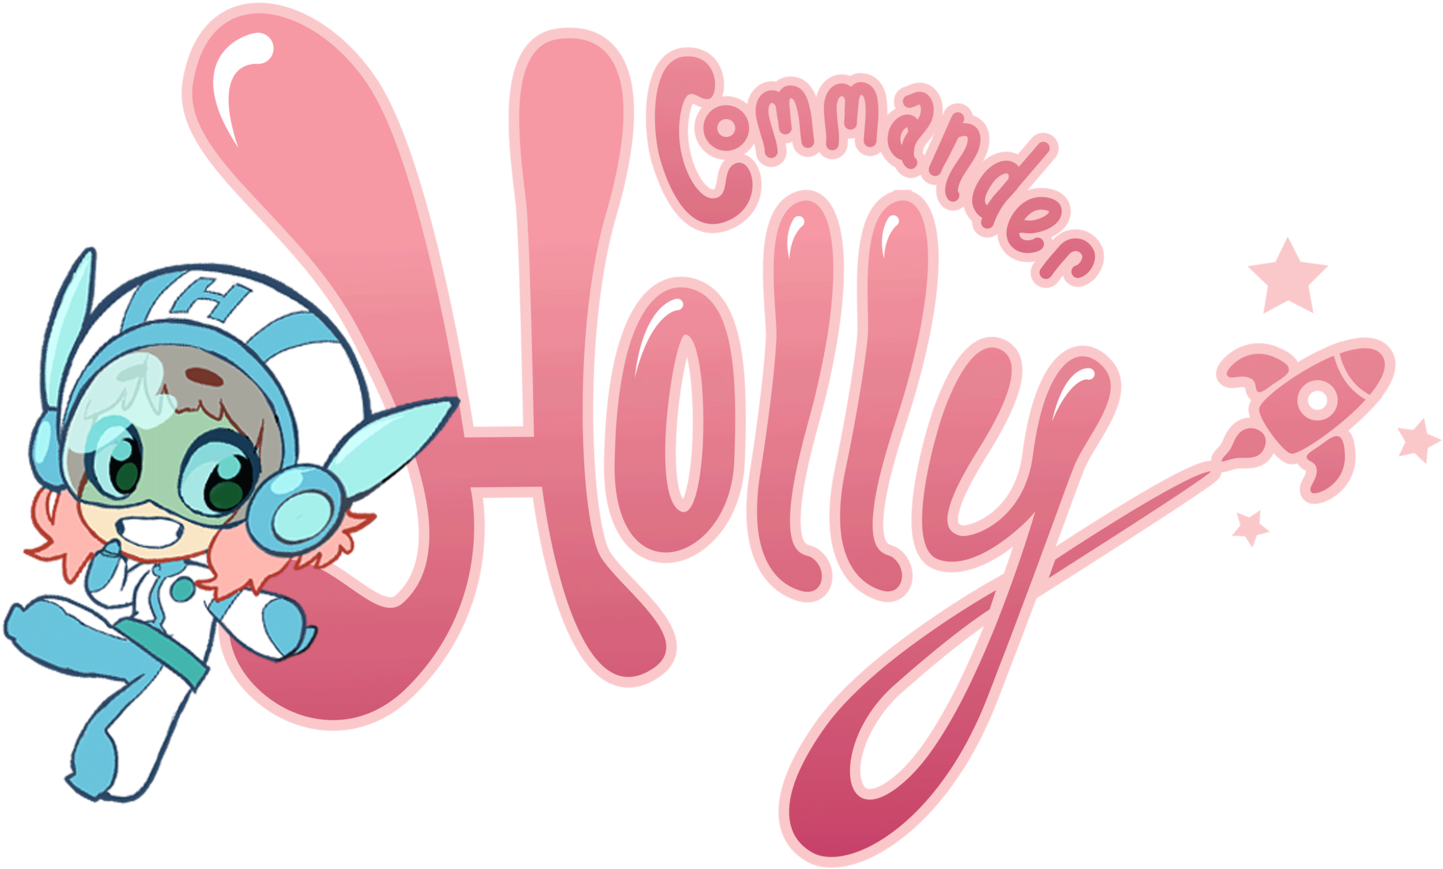 I Enter The Trendy Coffee Shop Looking For A Telltale - Commander Holly Logo (1592x1054)